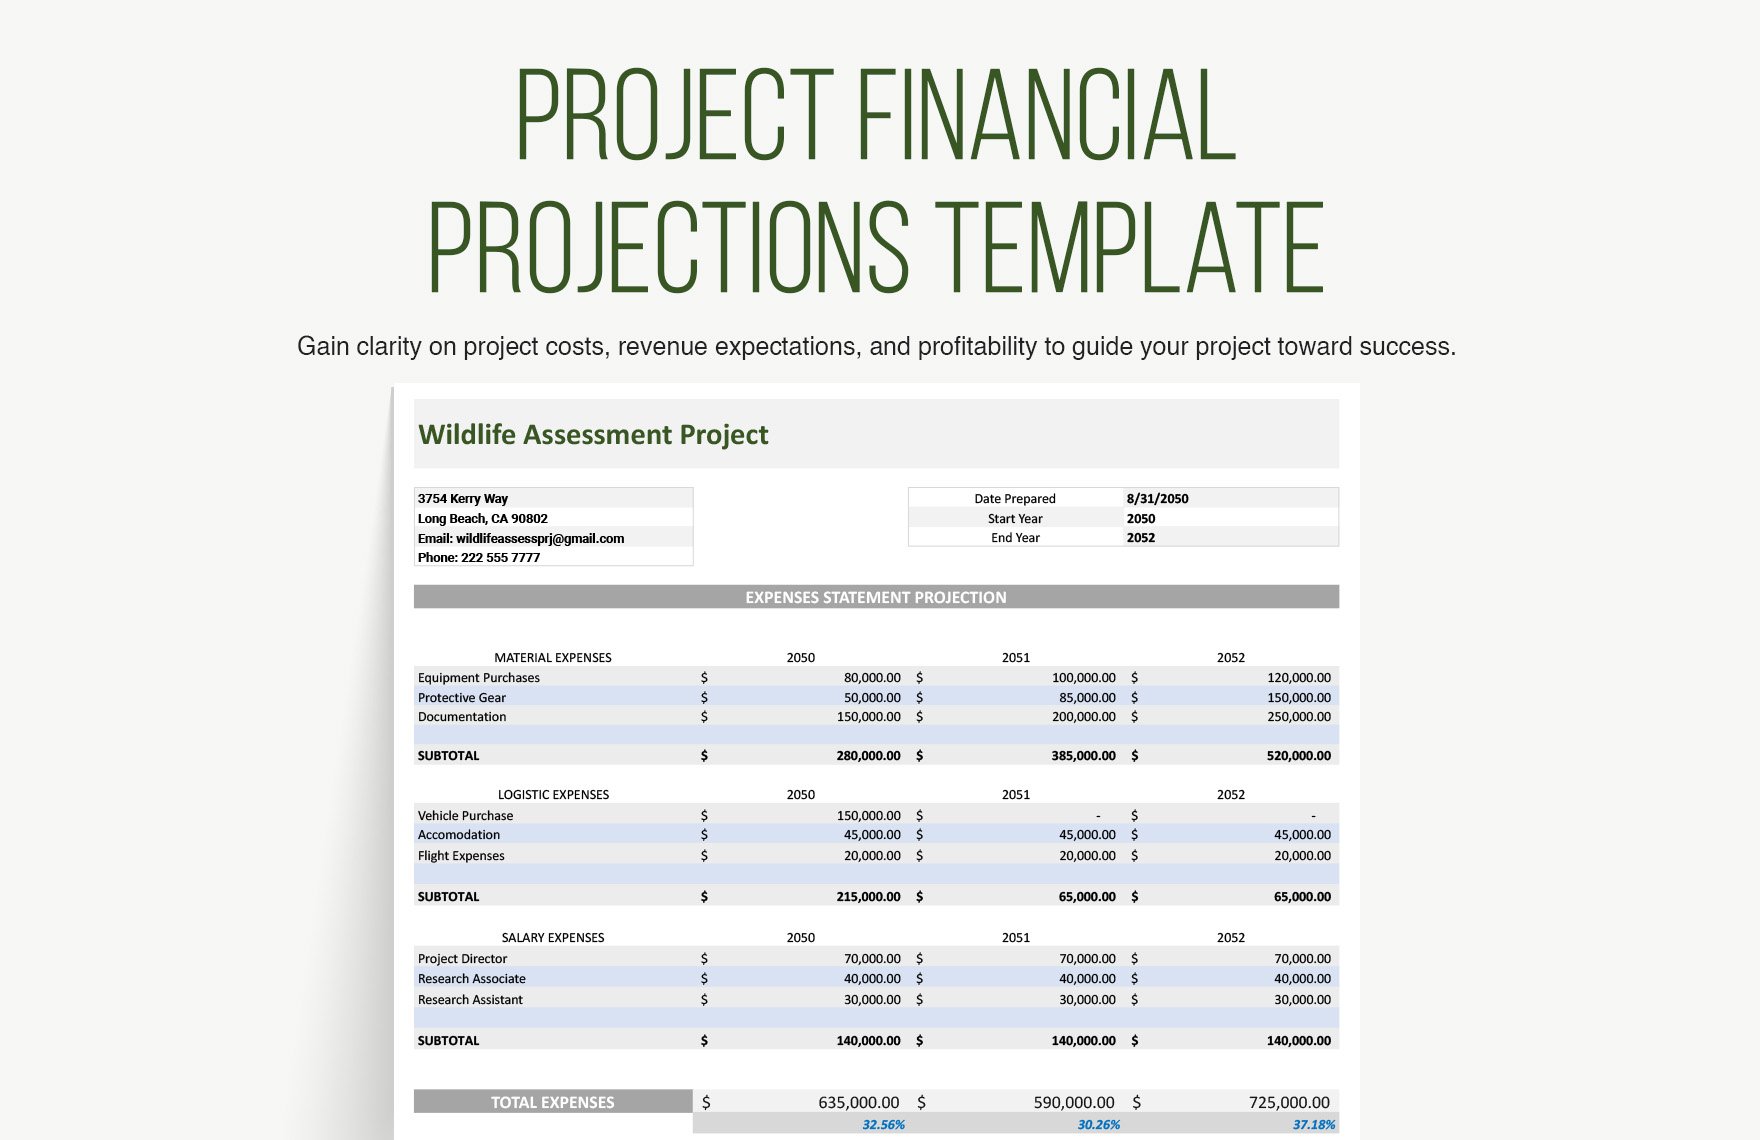 Project Financial Projections Template